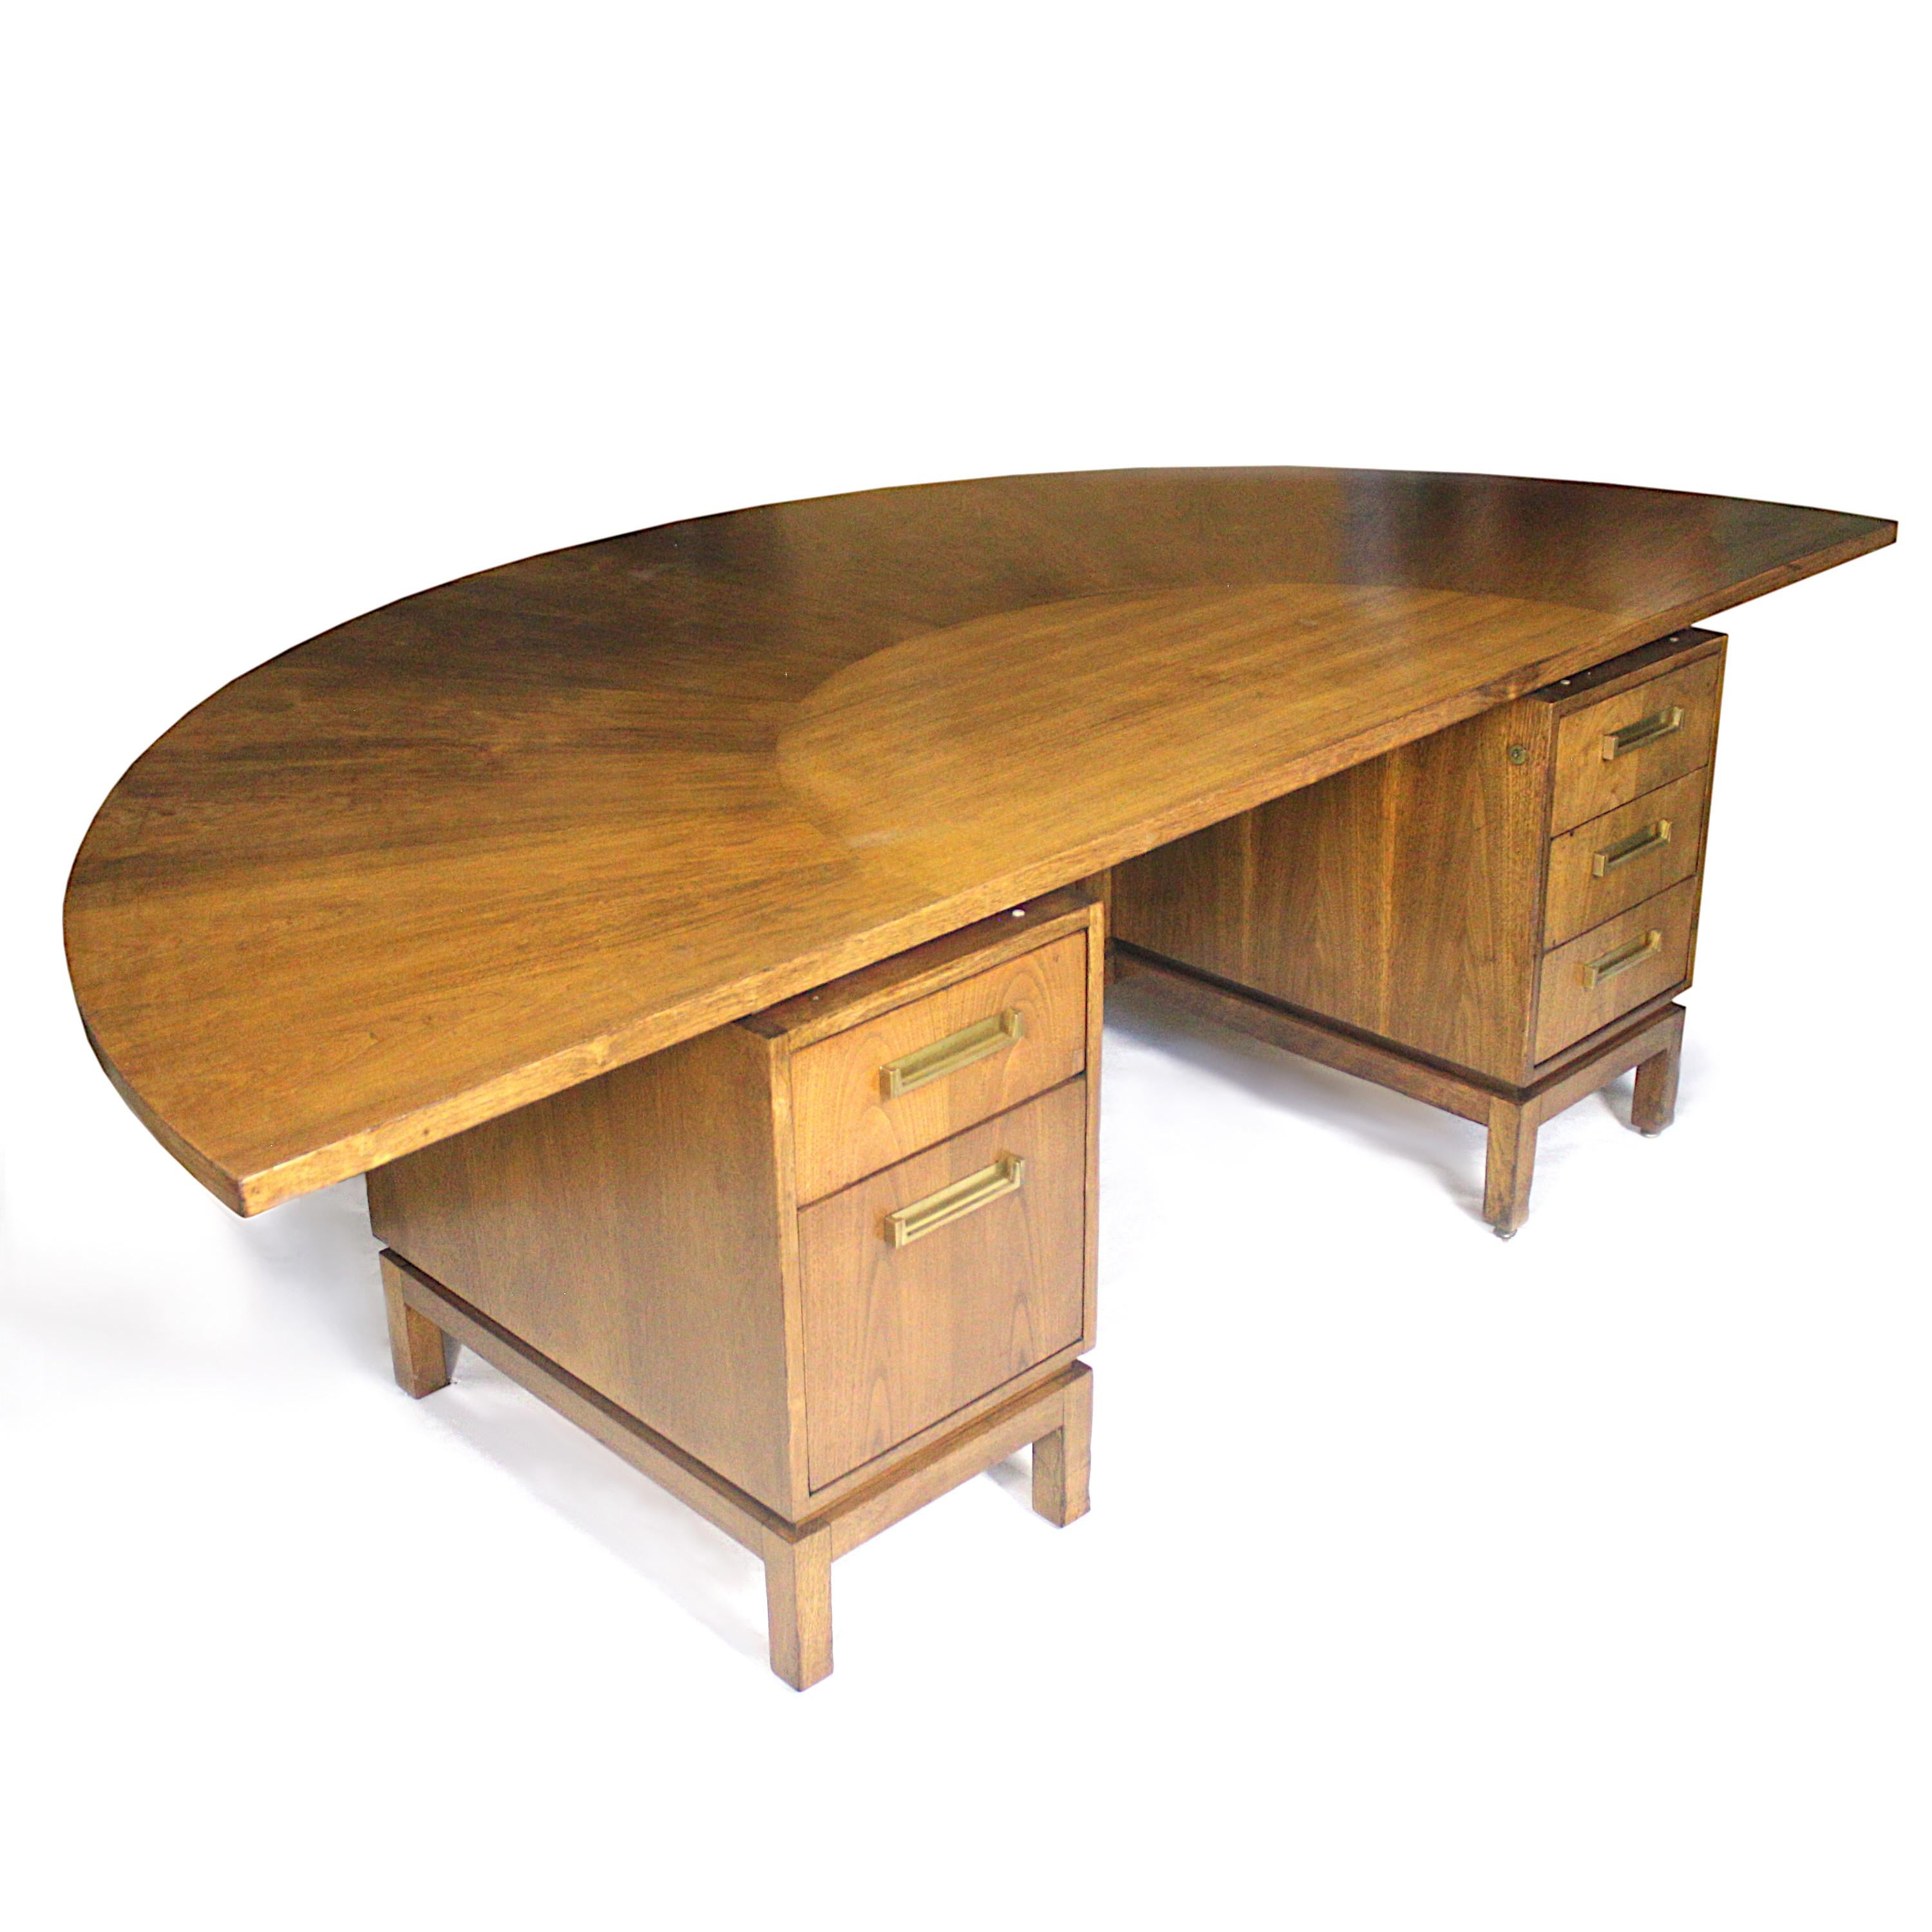 This spectacular Mid-Century Modern executive desk was manufactured by the Dunbar Furniture Co. of Berne, IN, and is accompanied by a matching sonsole. Desk features a beautiful Asian-influenced, mahogany base with gorgeous brass, hinged drawer